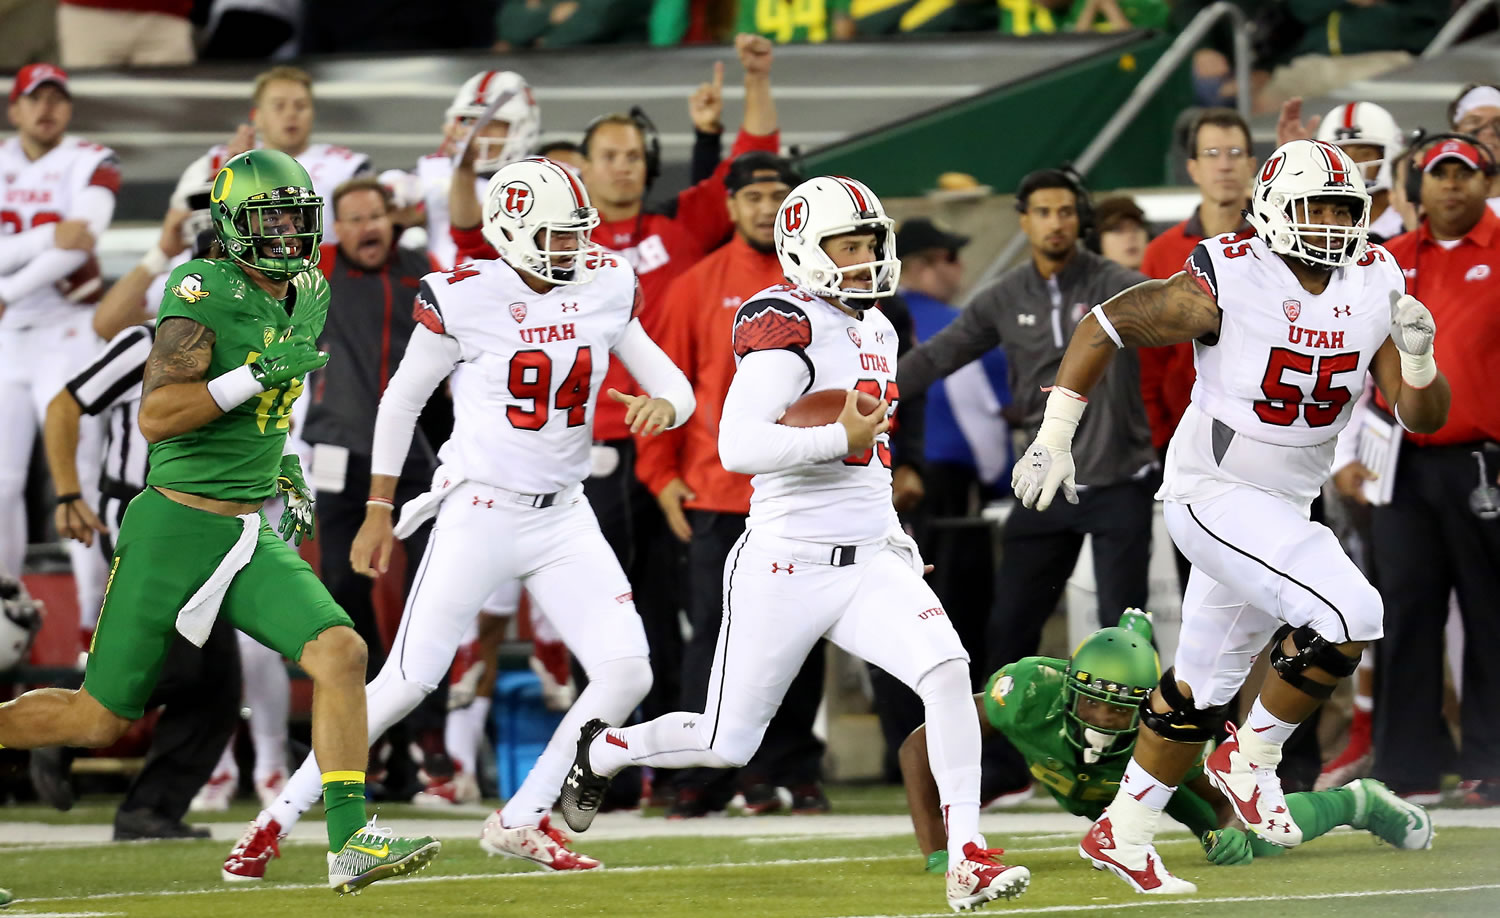 Utah punter Tom Hackett (33) runs the ball after a fake punt during the third quarter Saturday. The run came after a re-kick after the first punt had hit a camera wire hanging over the field.